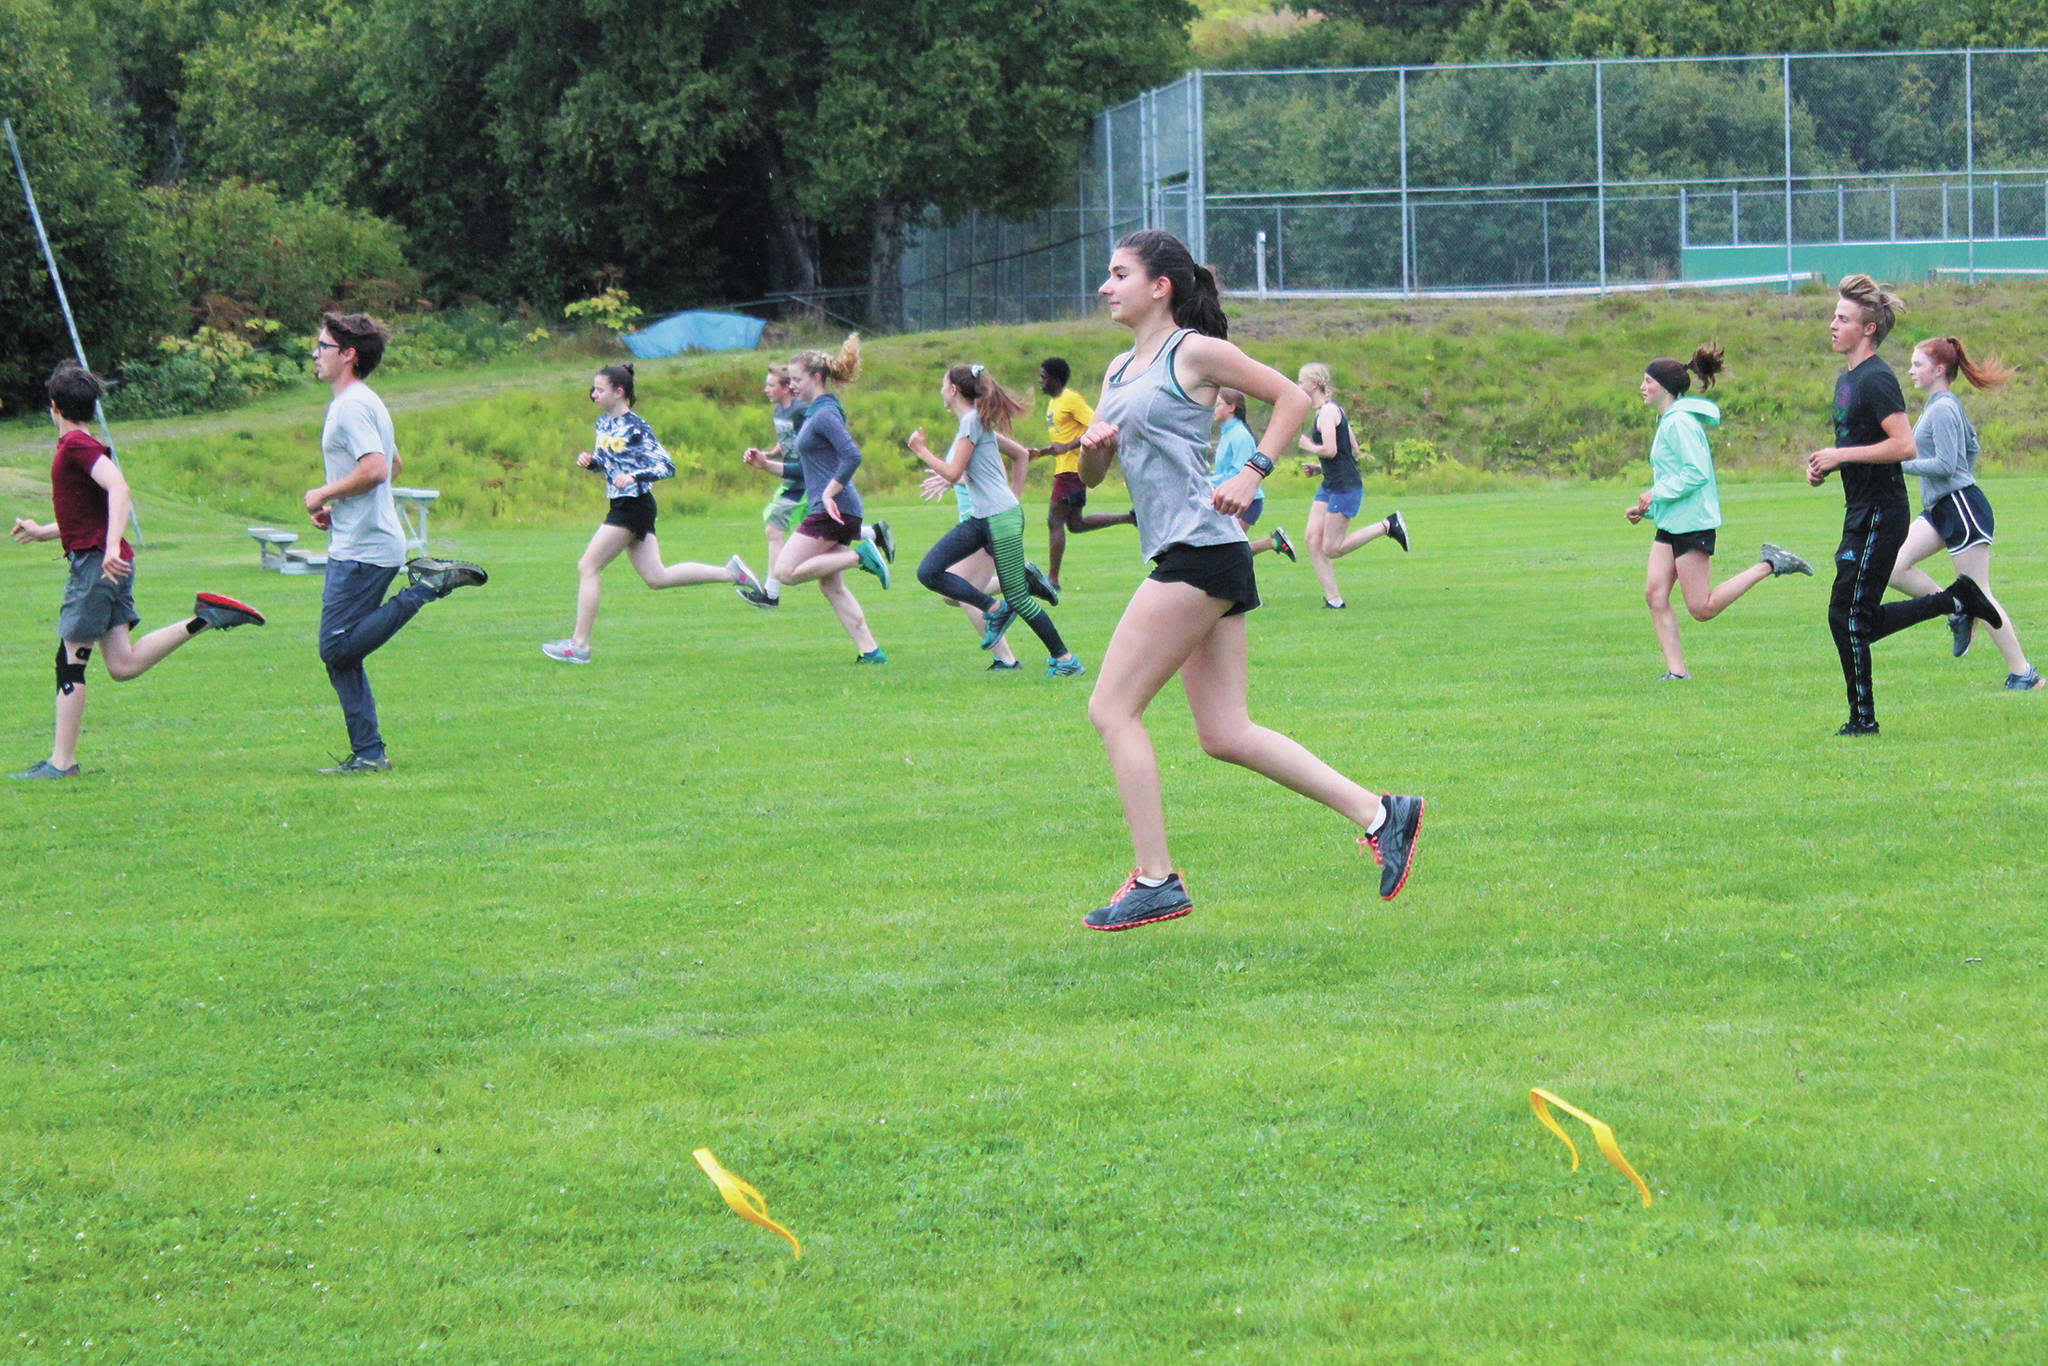 Members of the Homer High School cross country team perform warm up drills at a practice Tuesday, Aug. 18, 2020 at the school in Homer, Alaska. (Photo by Megan Pacer/Homer News)